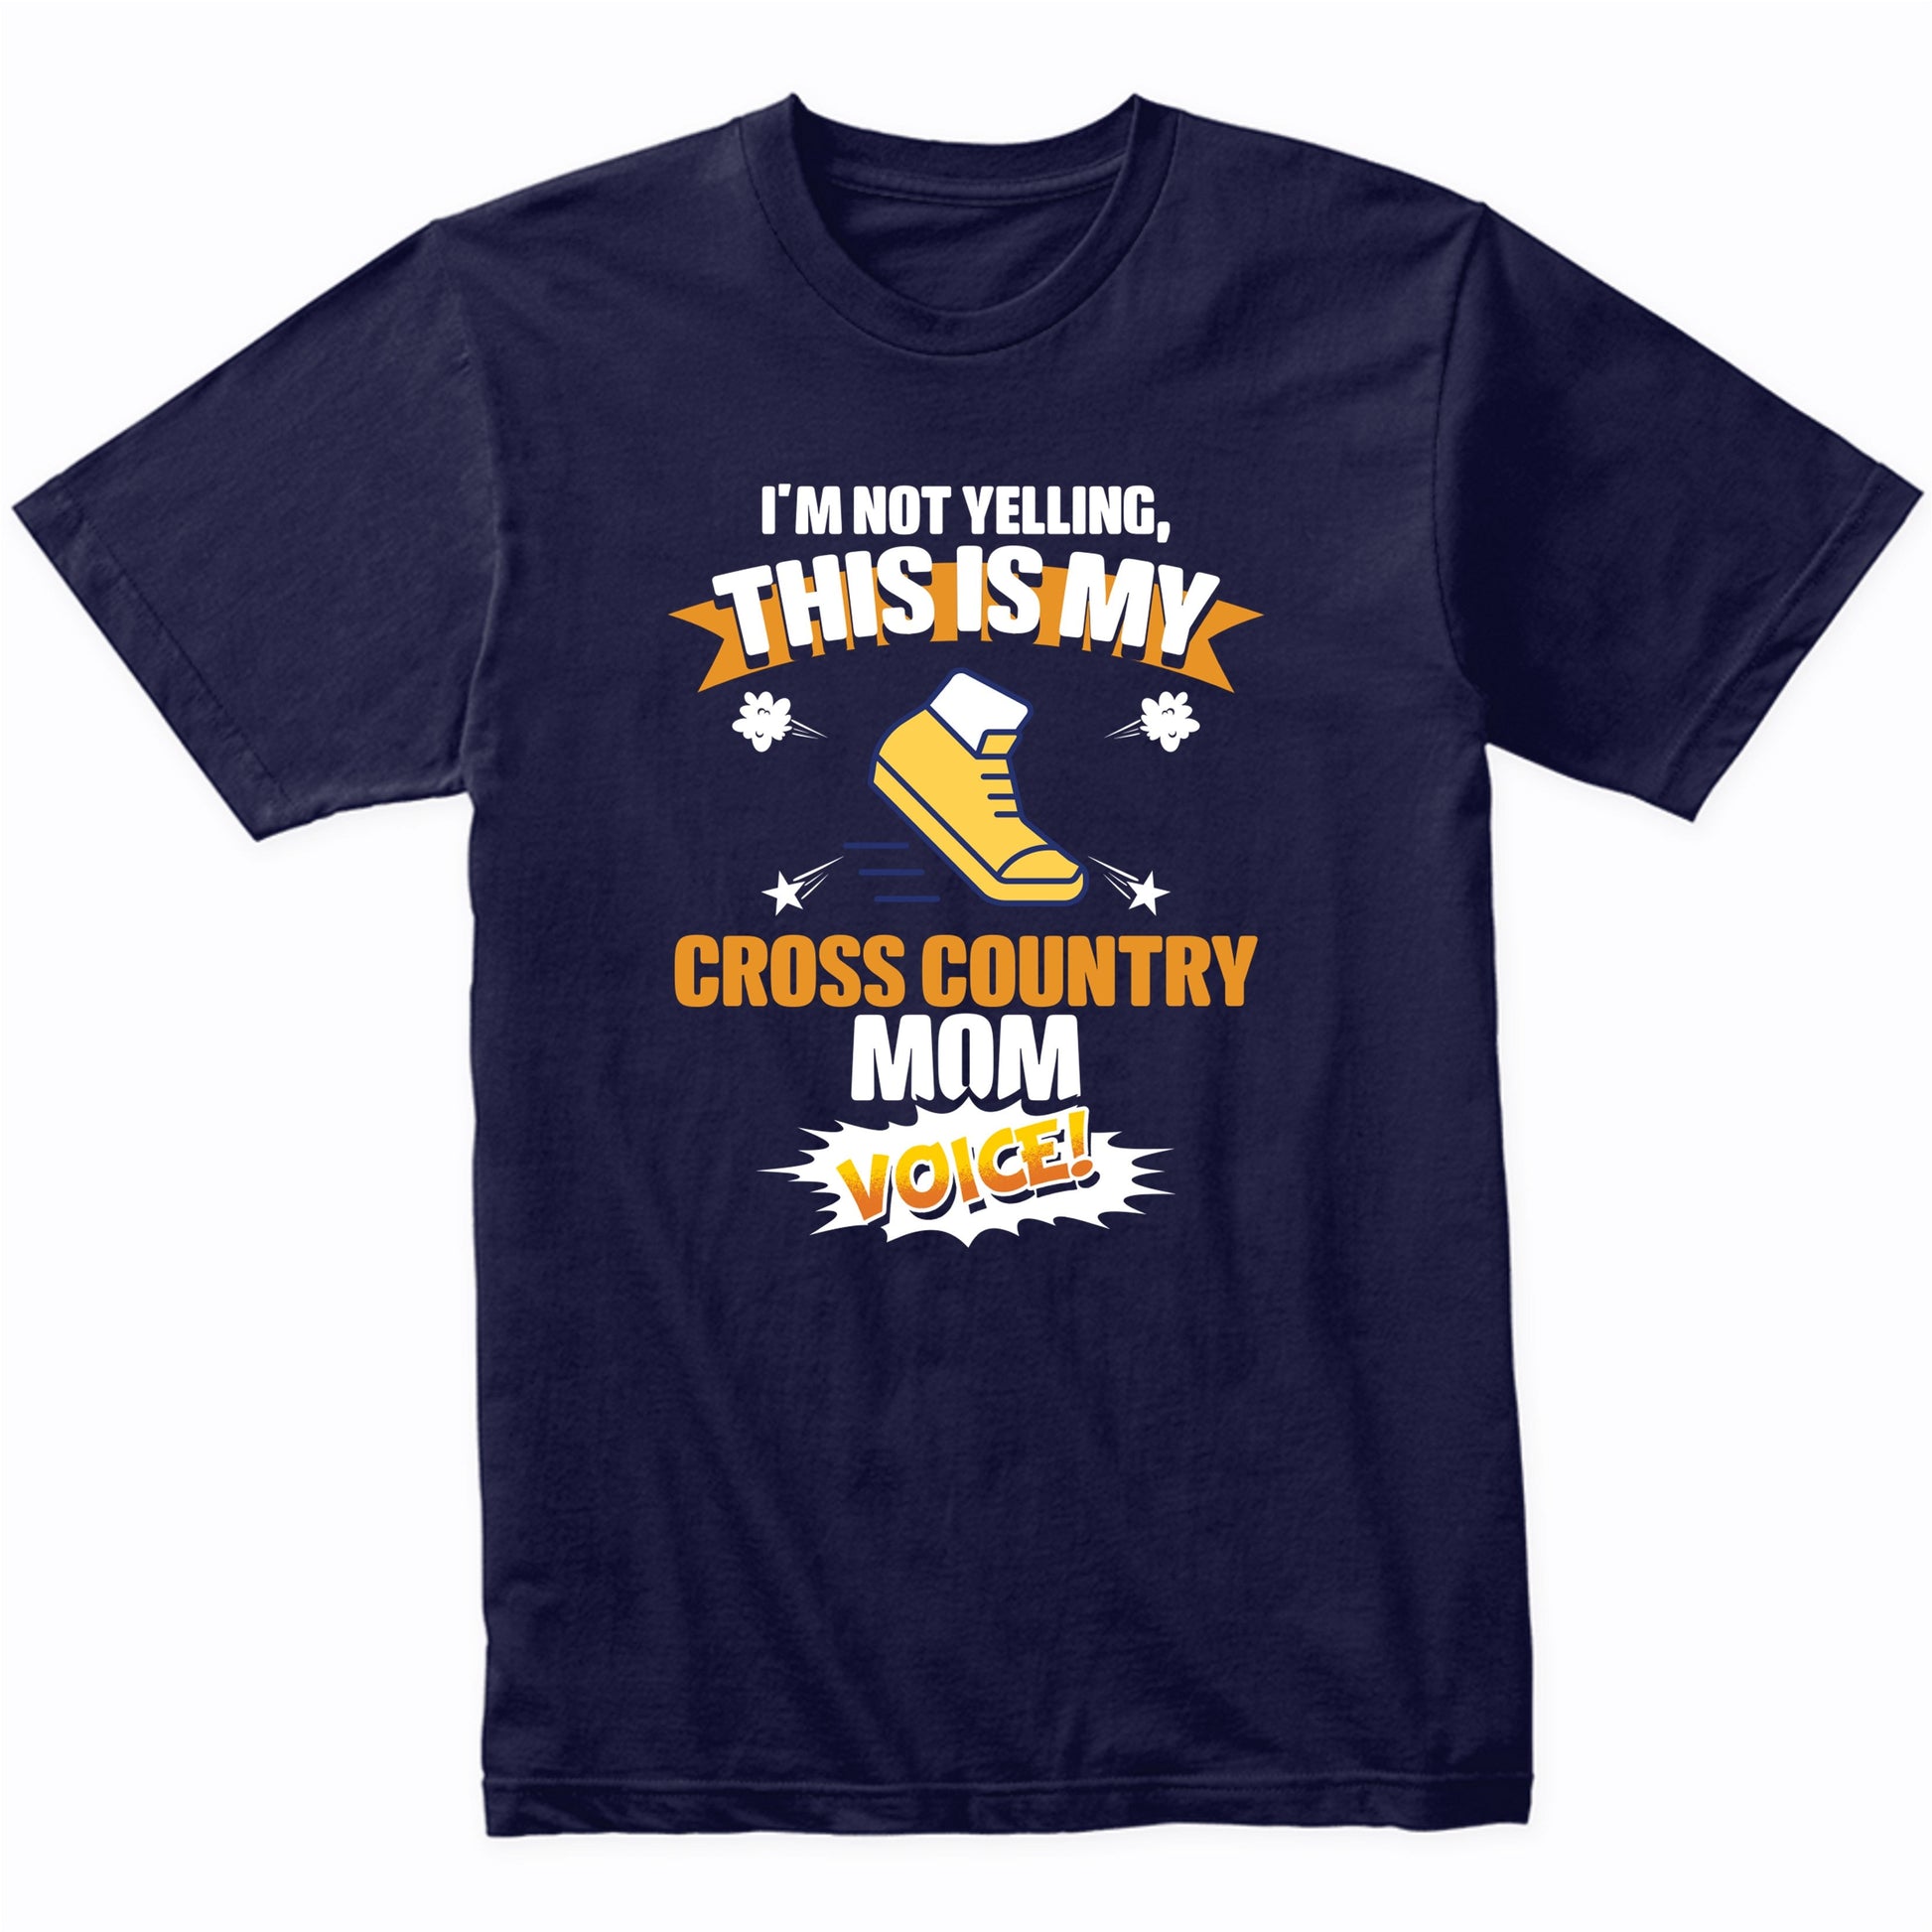 I'm Not Yelling This Is My Cross Country Mom Voice Funny T-Shirt